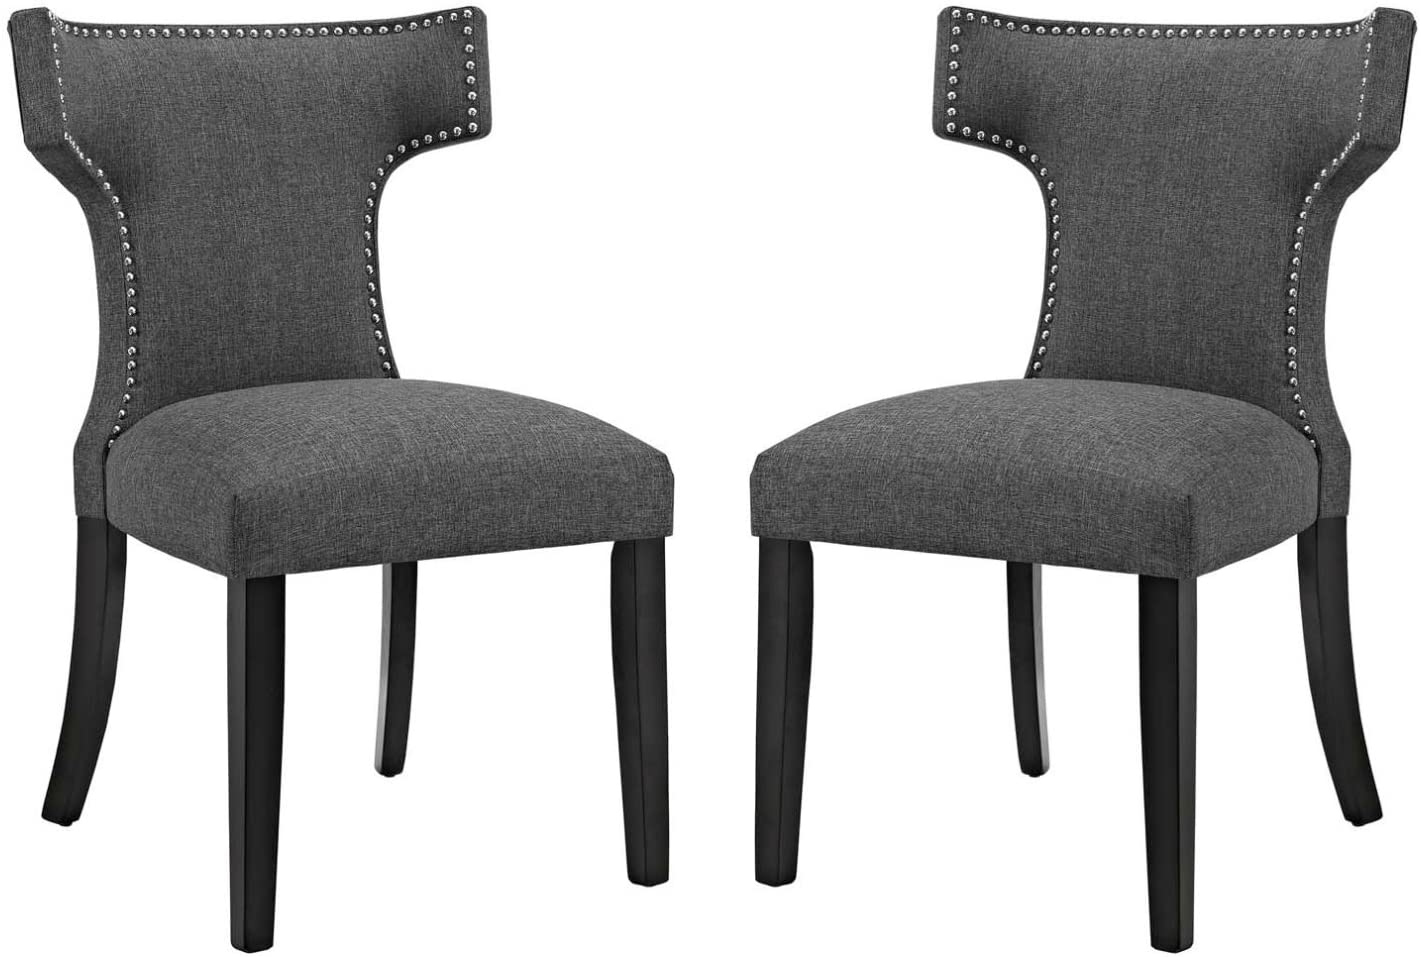 B076DLT1VT Modern Contemporary Urban Design Kitchen Room Dining Side Chair ( Set of Two), Grey Gray, Fabric